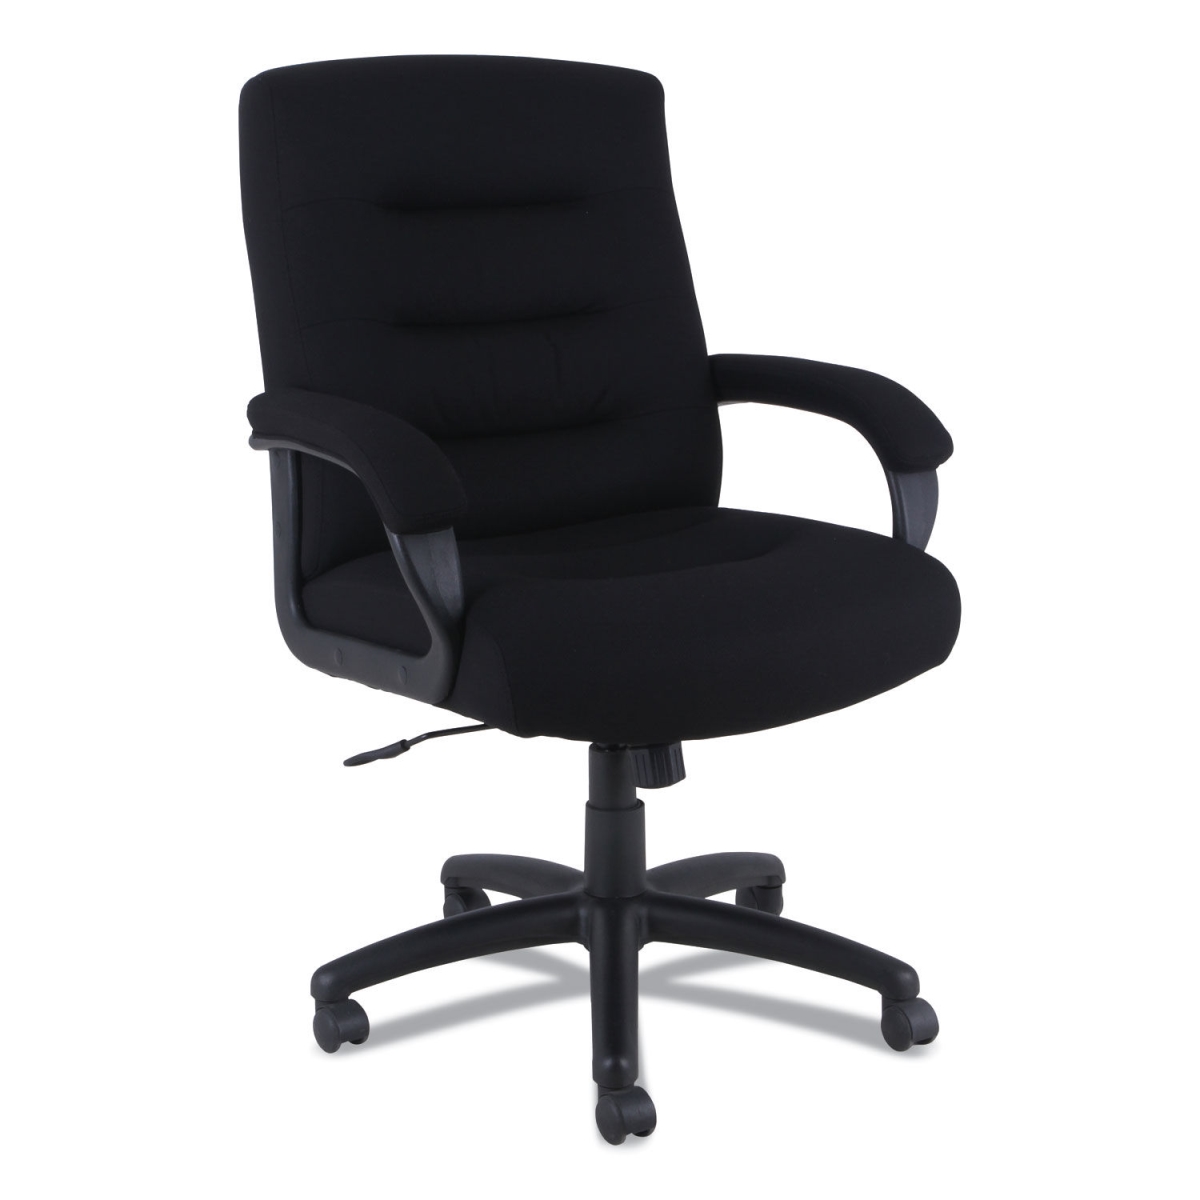 Alera Ks4210 Kesson Series Mid-back Office Chair With Black Seat & Back